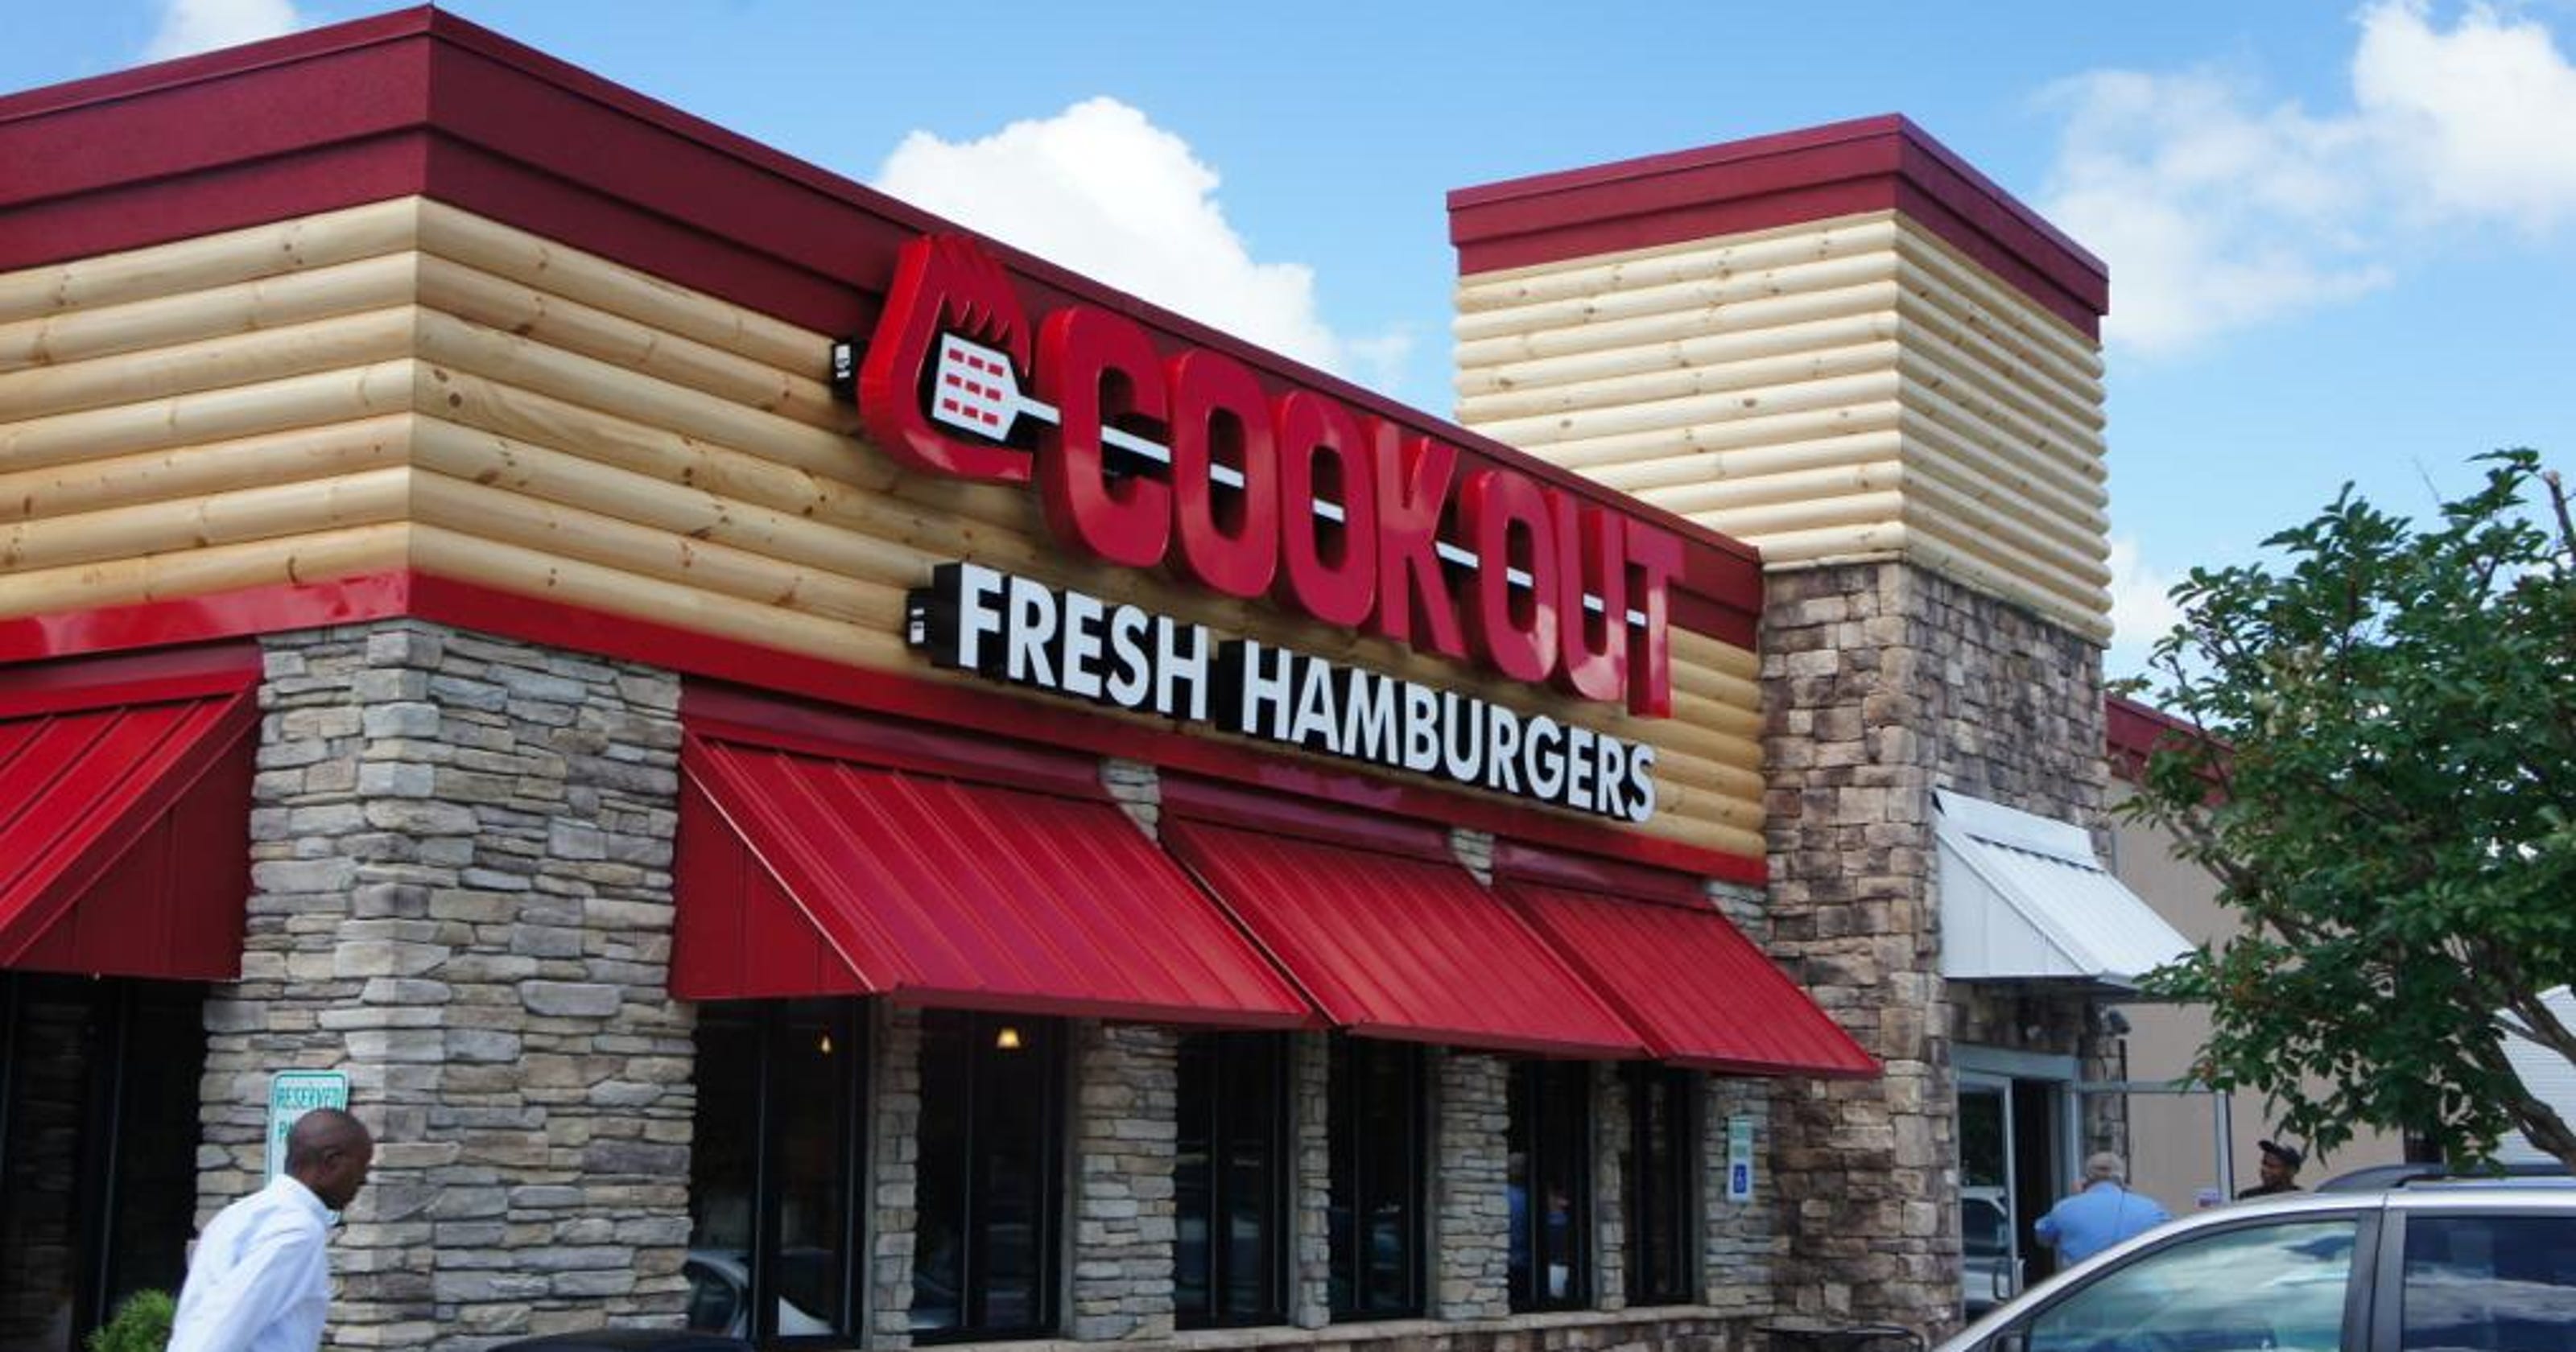 Cook Out restaurant coming to West End